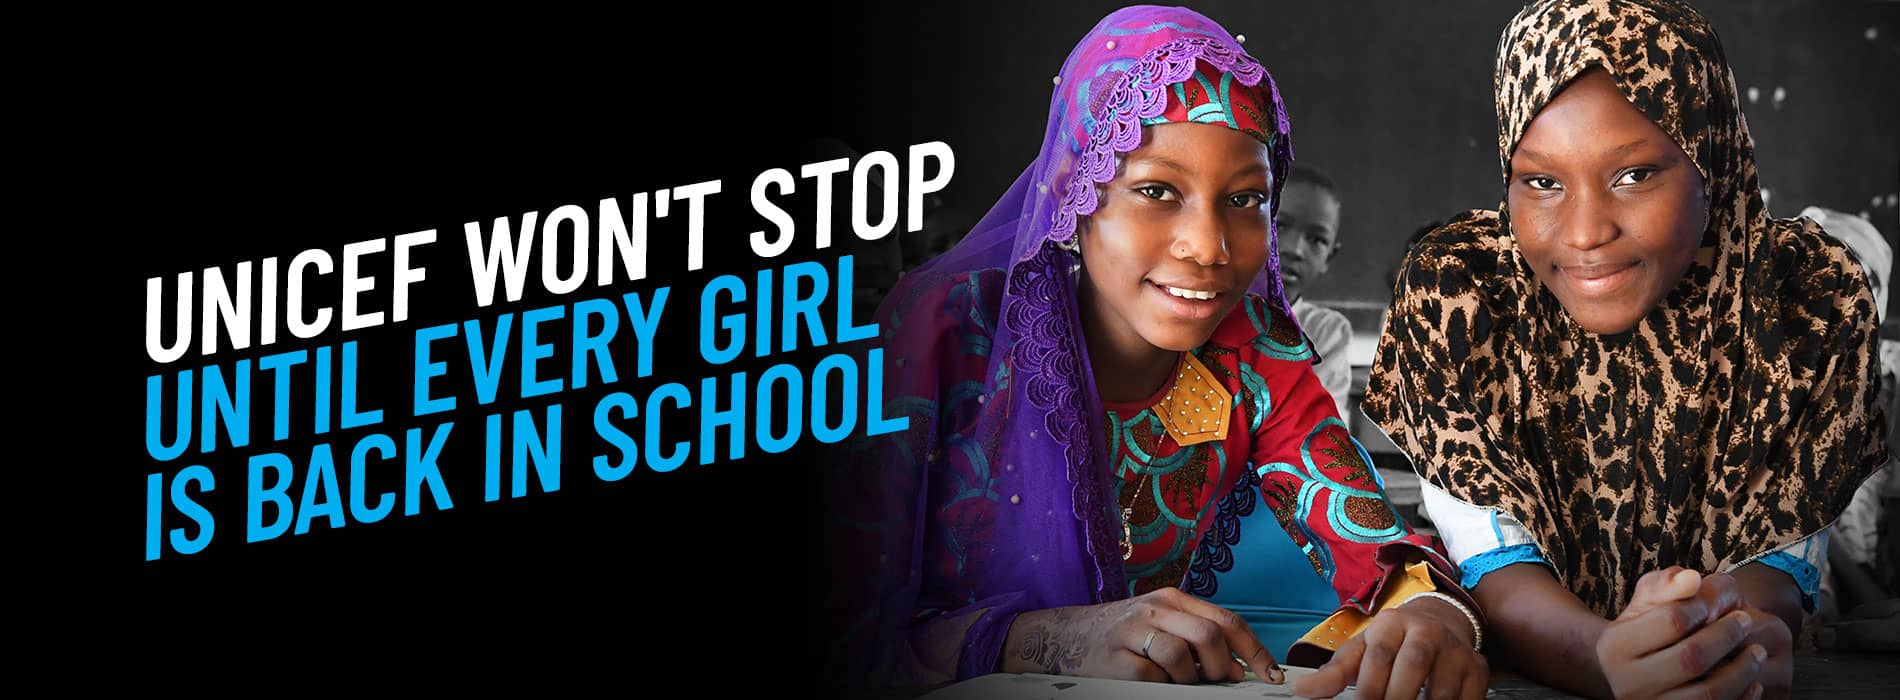 UNICEF won't stop until every girl is back in school.